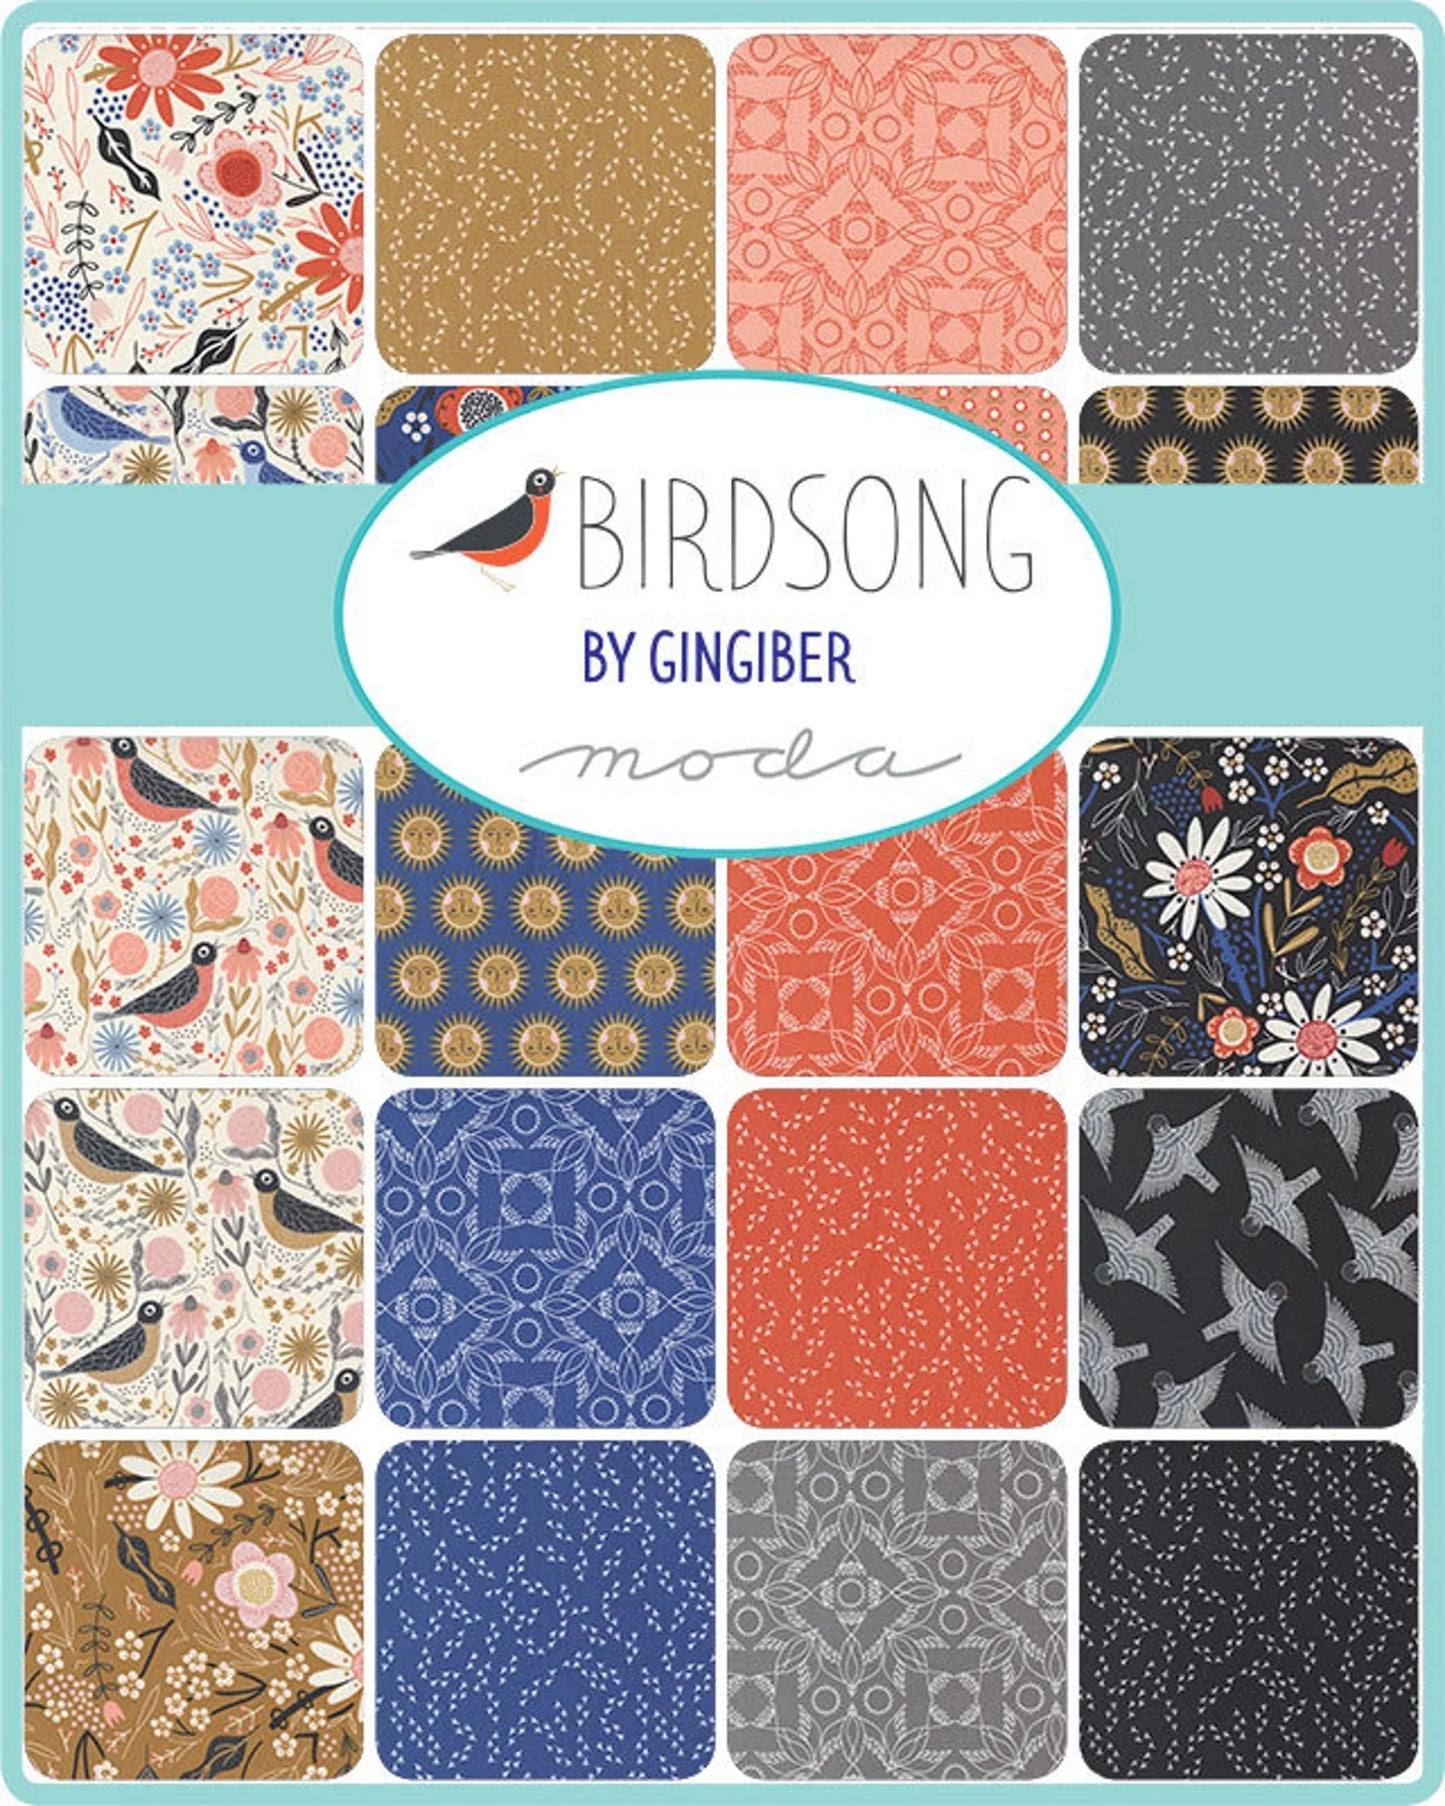 Birdsong 5" charm pack fabric